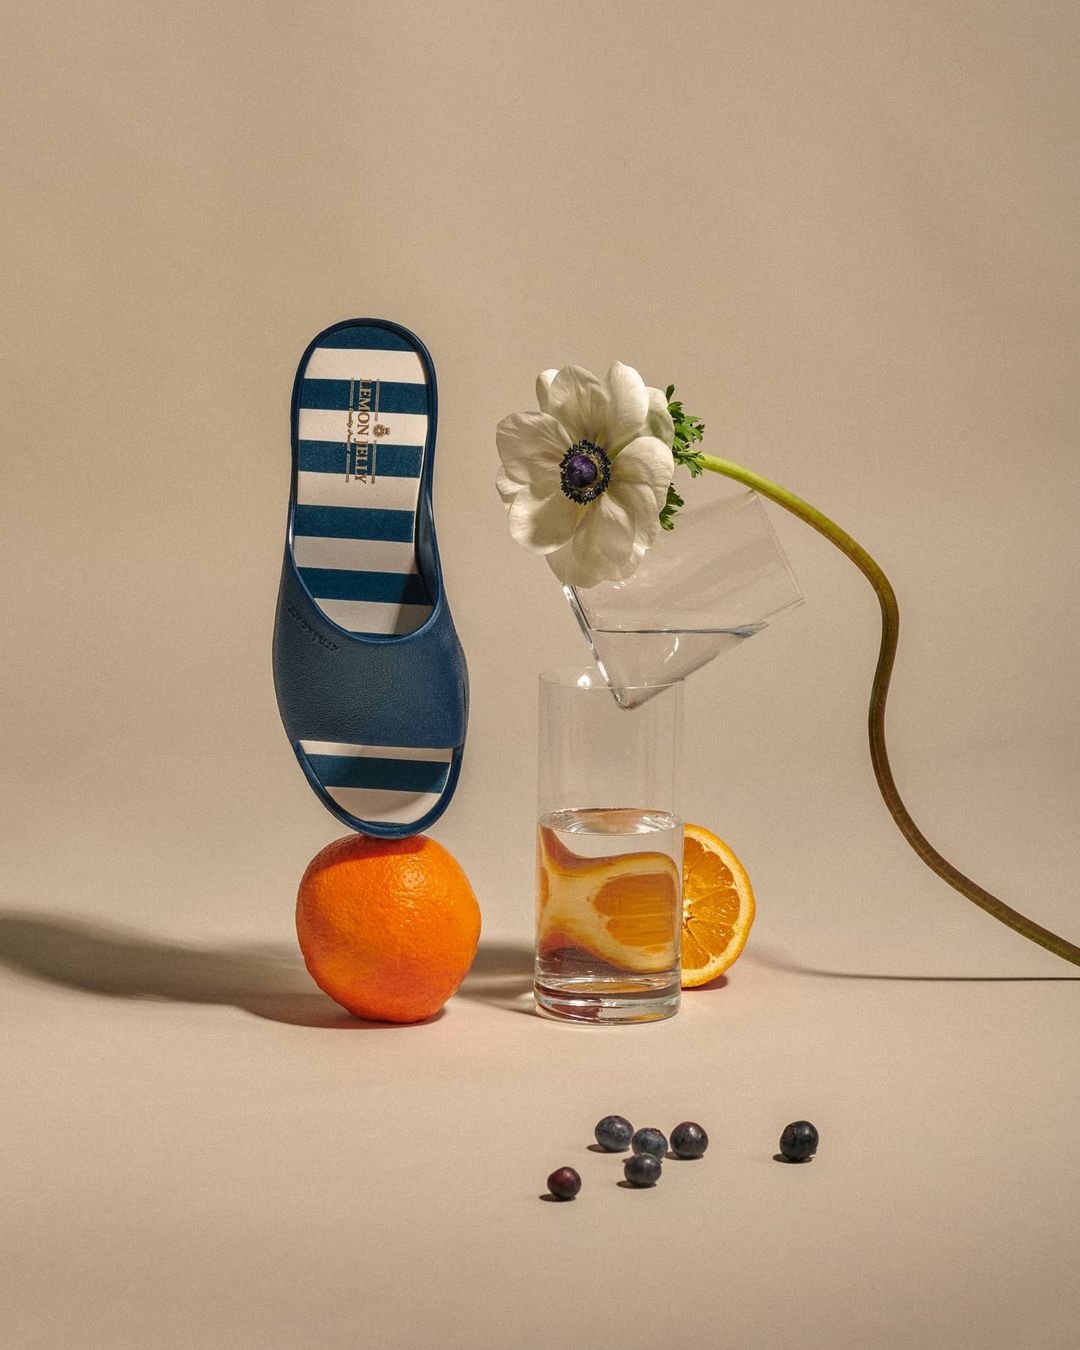 creative product photography examples